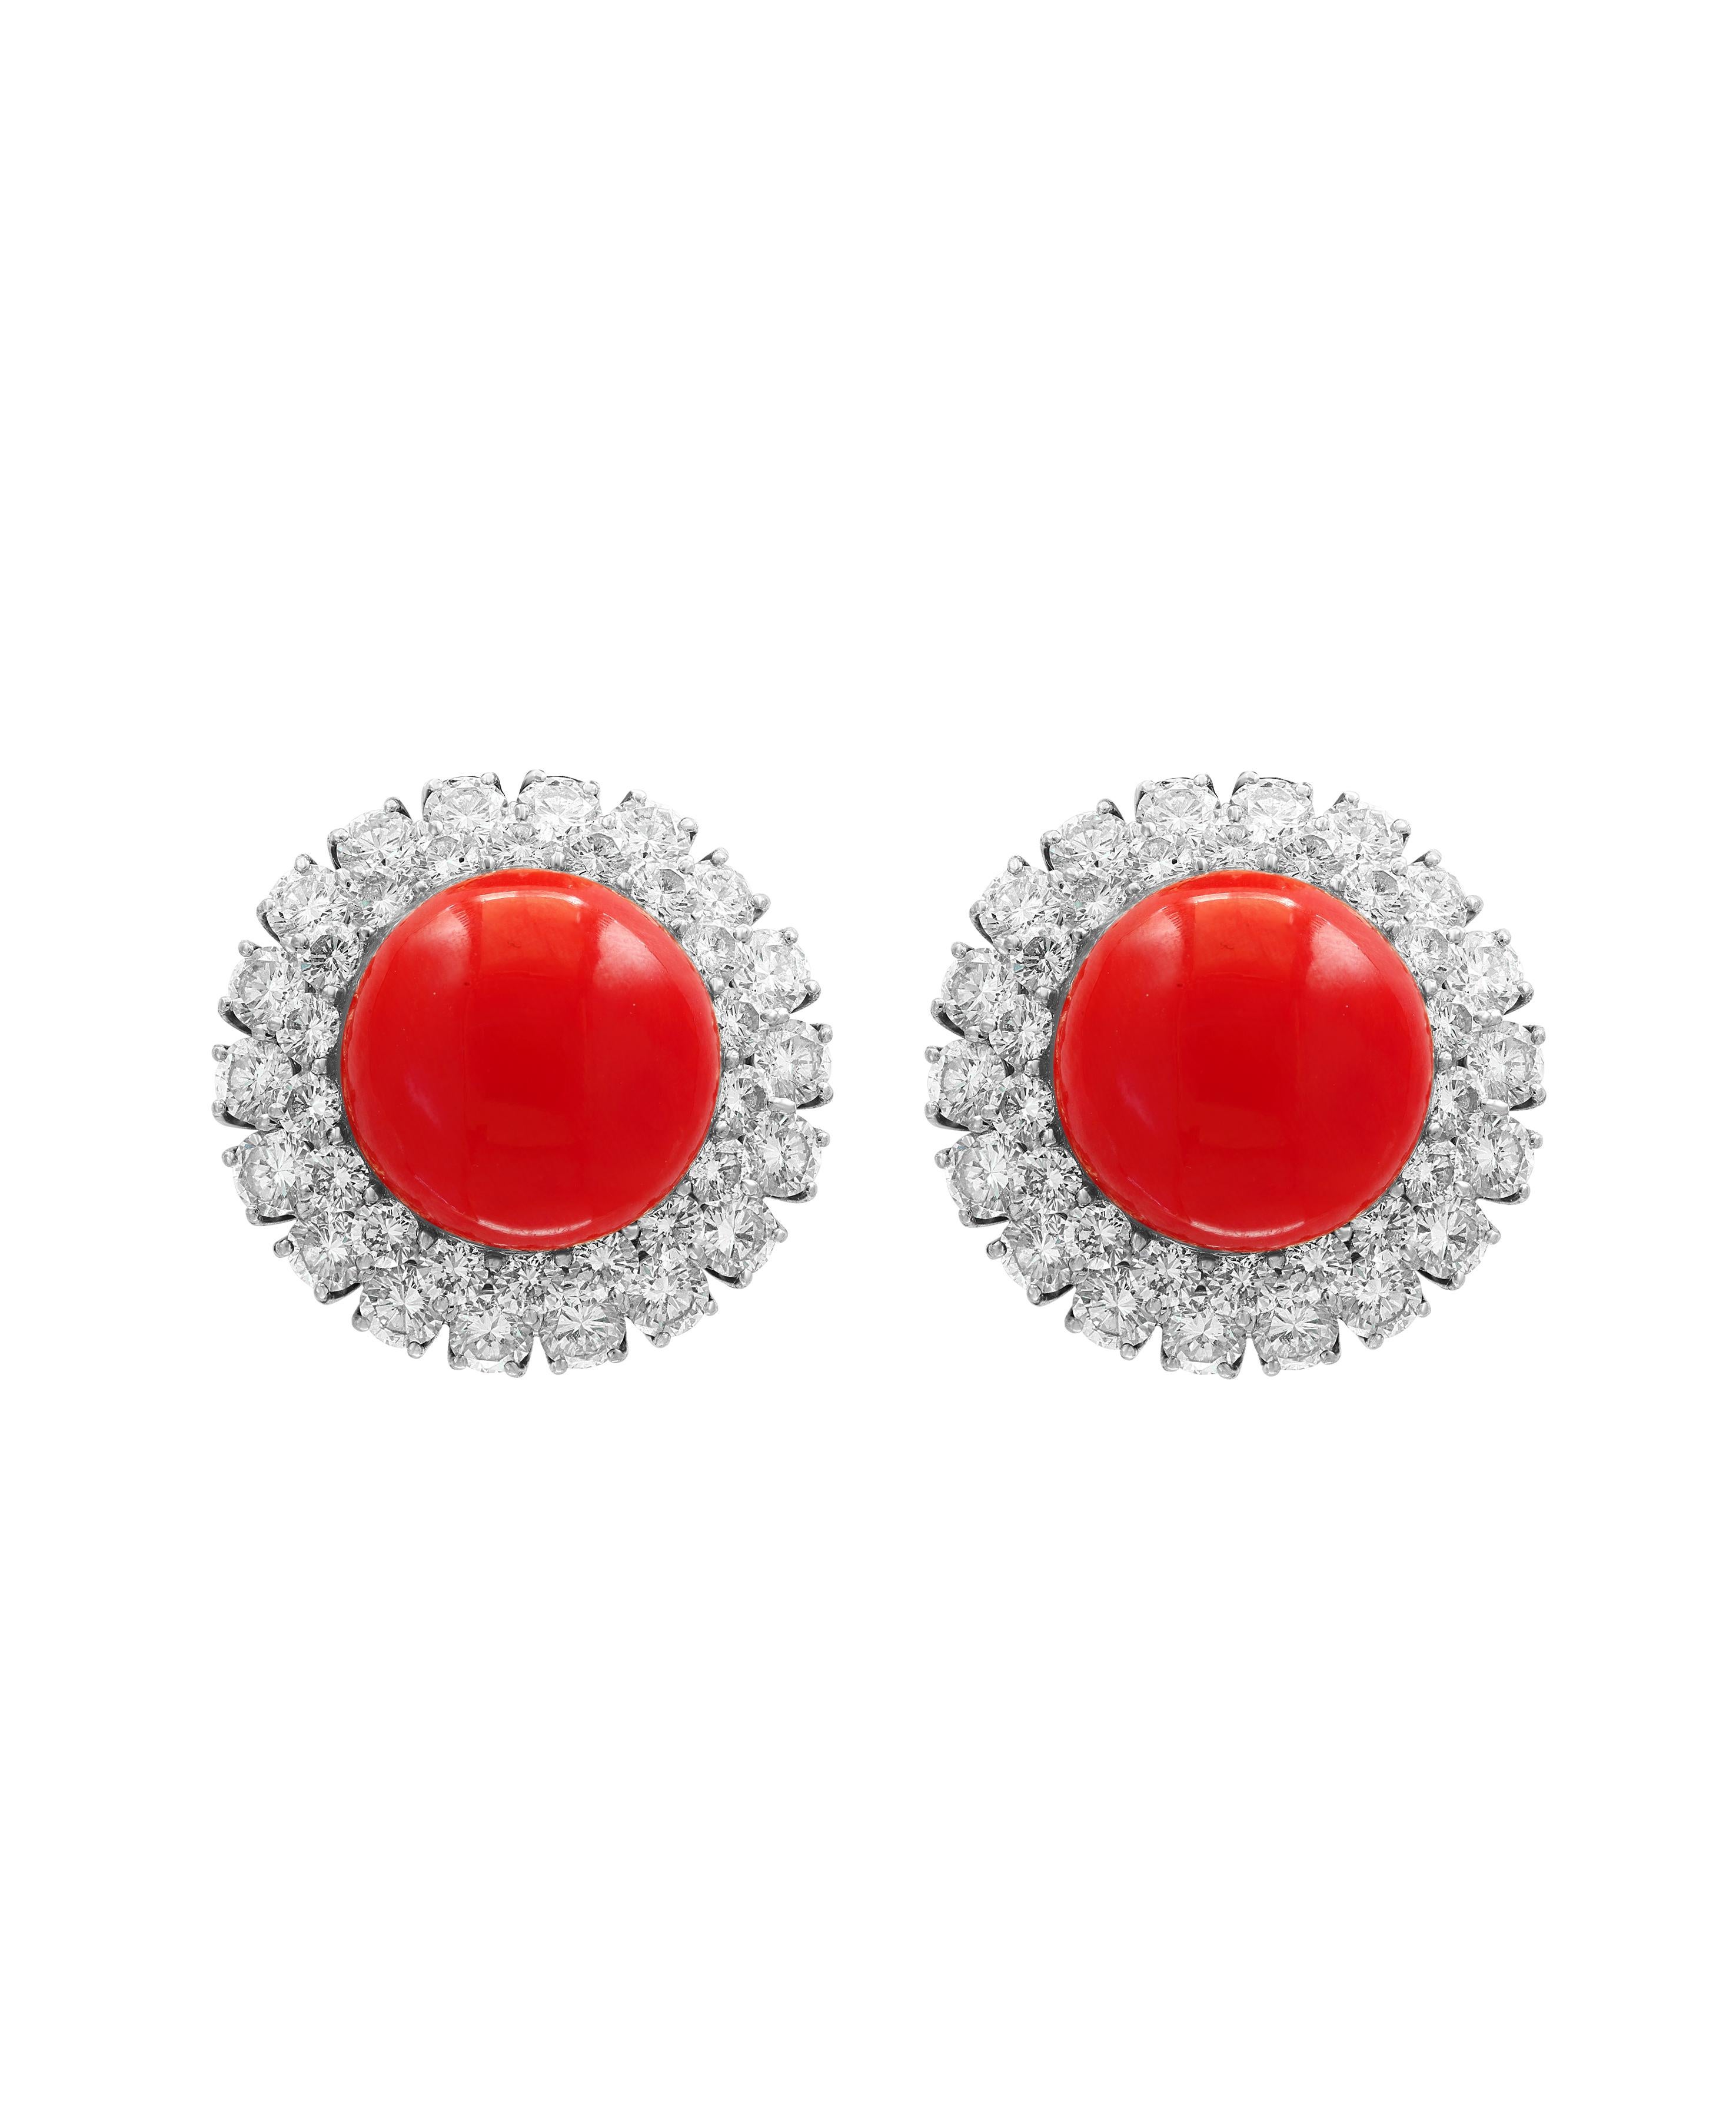 35 Carat Natural Coral and 12 Carat DeBeers Diamond Cocktail Earring in Platinum For Sale 1